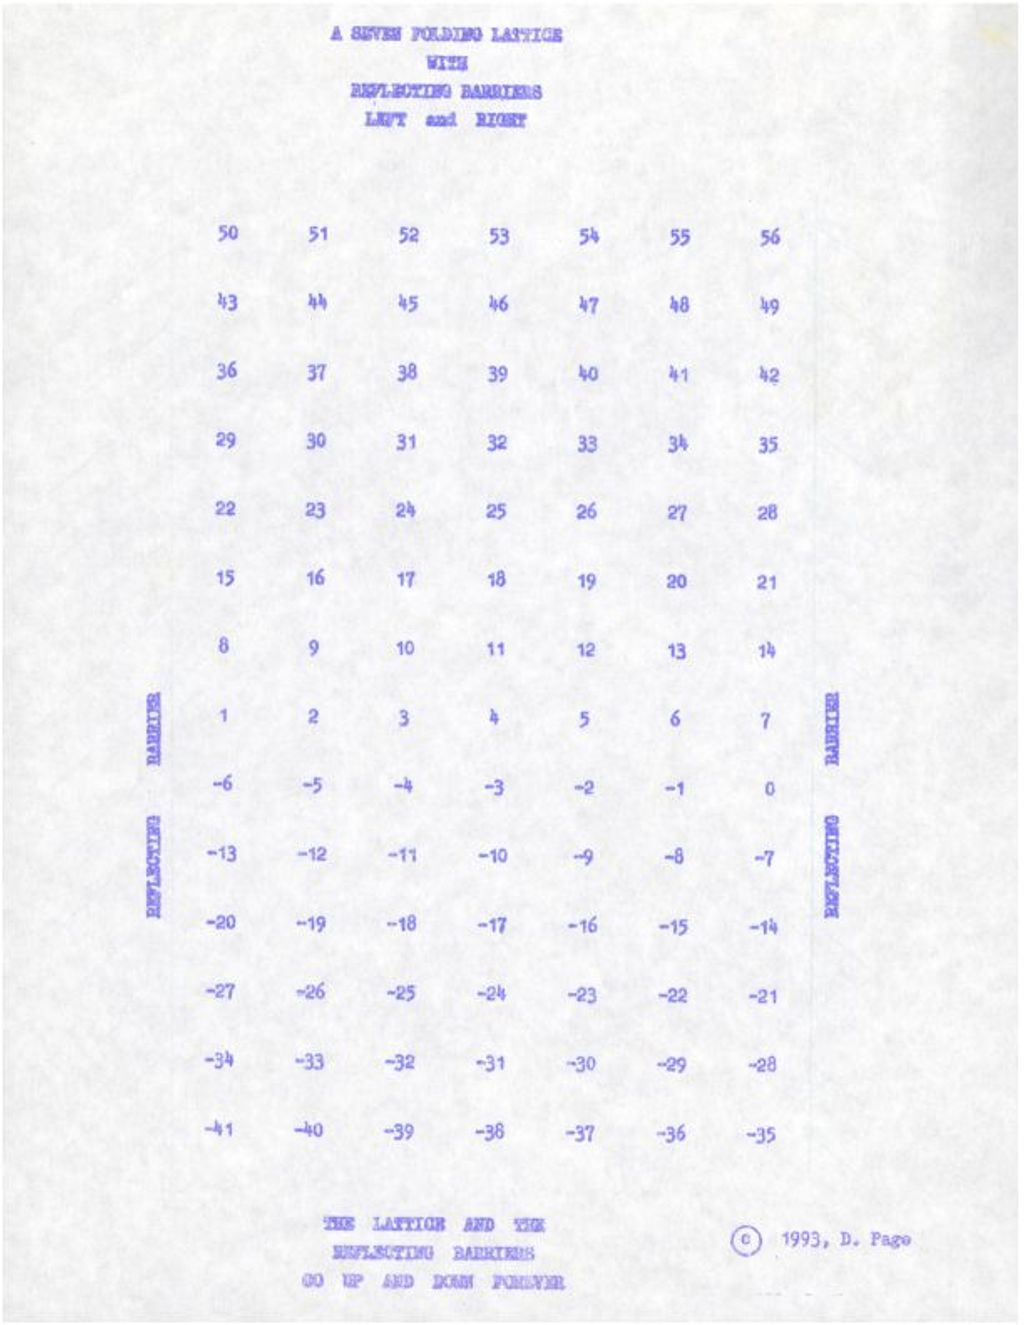 A Seven Folding Lattice with Reflecting Barriers Left and Right (lattice only) (1993)